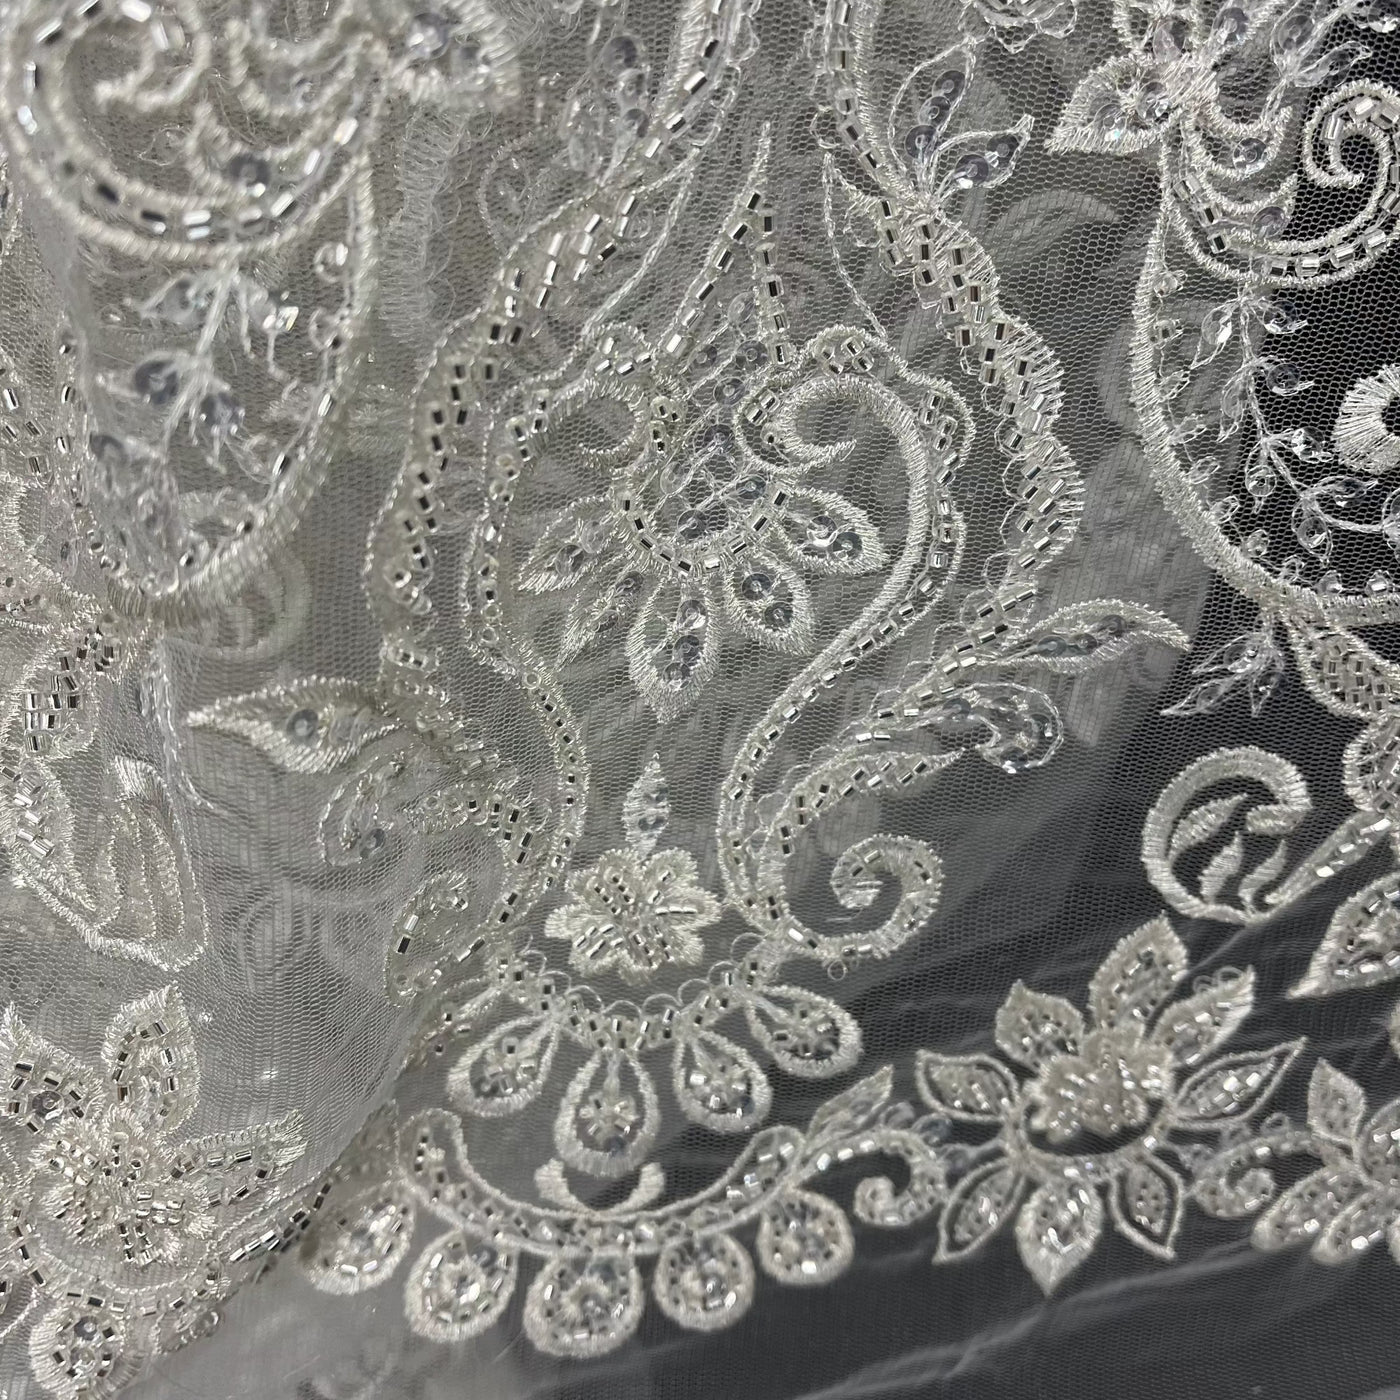 Beaded & Sequined Lace Fabric Embroidered on 100% Polyester Net Mesh | Lace USA - GD-12156 Ivory with Silver